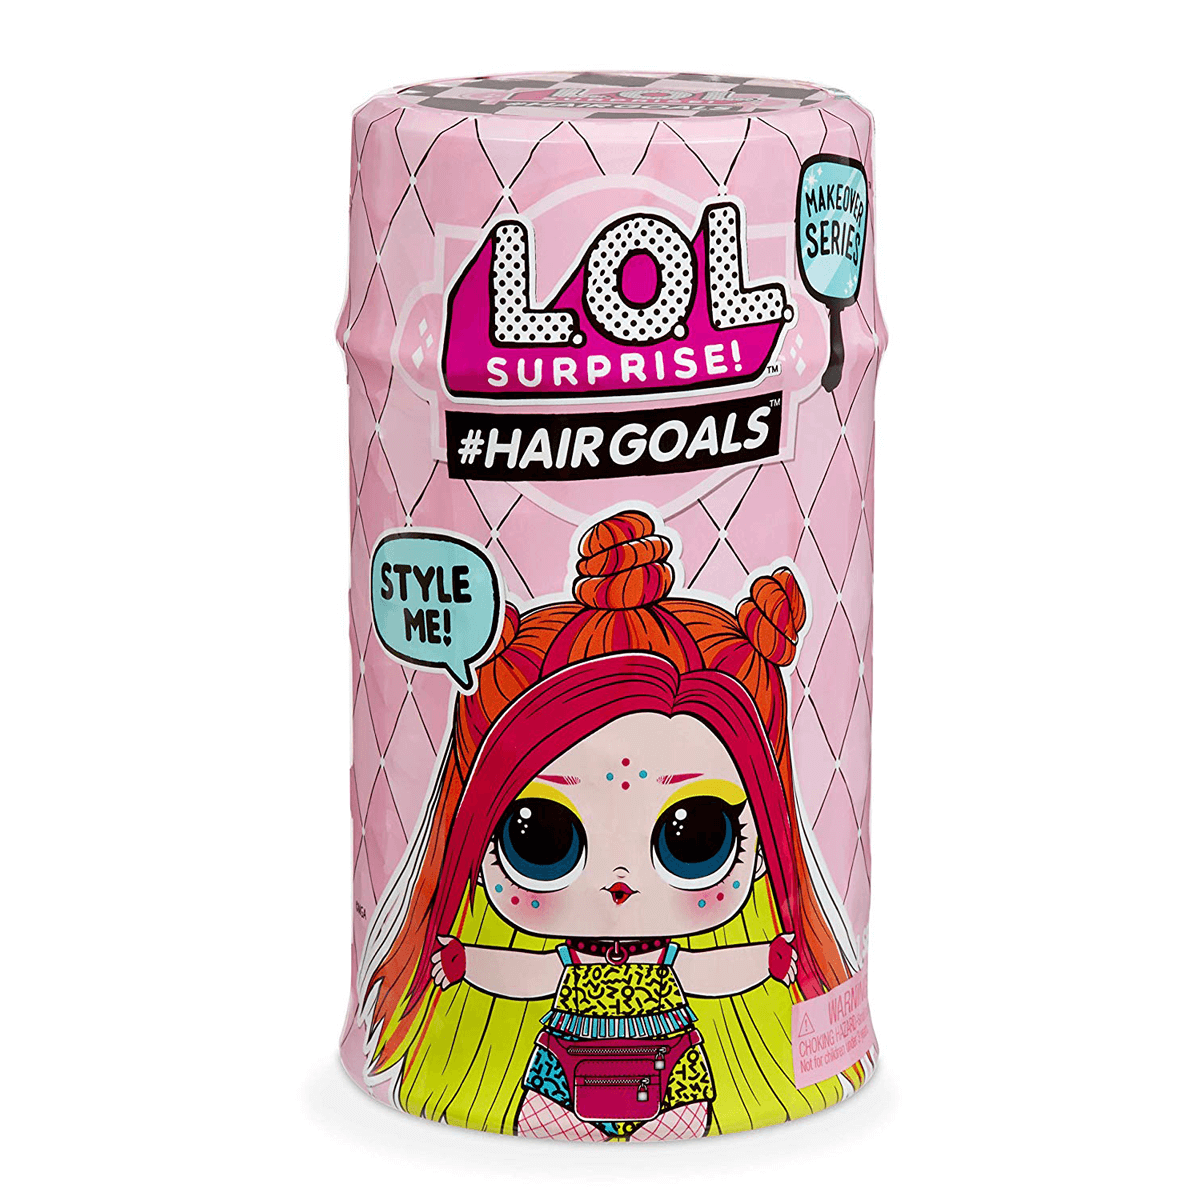 IN-HAND Brand New L.O.L Surprise HAIRGOALS MakeOver SERIES 2 Doll 